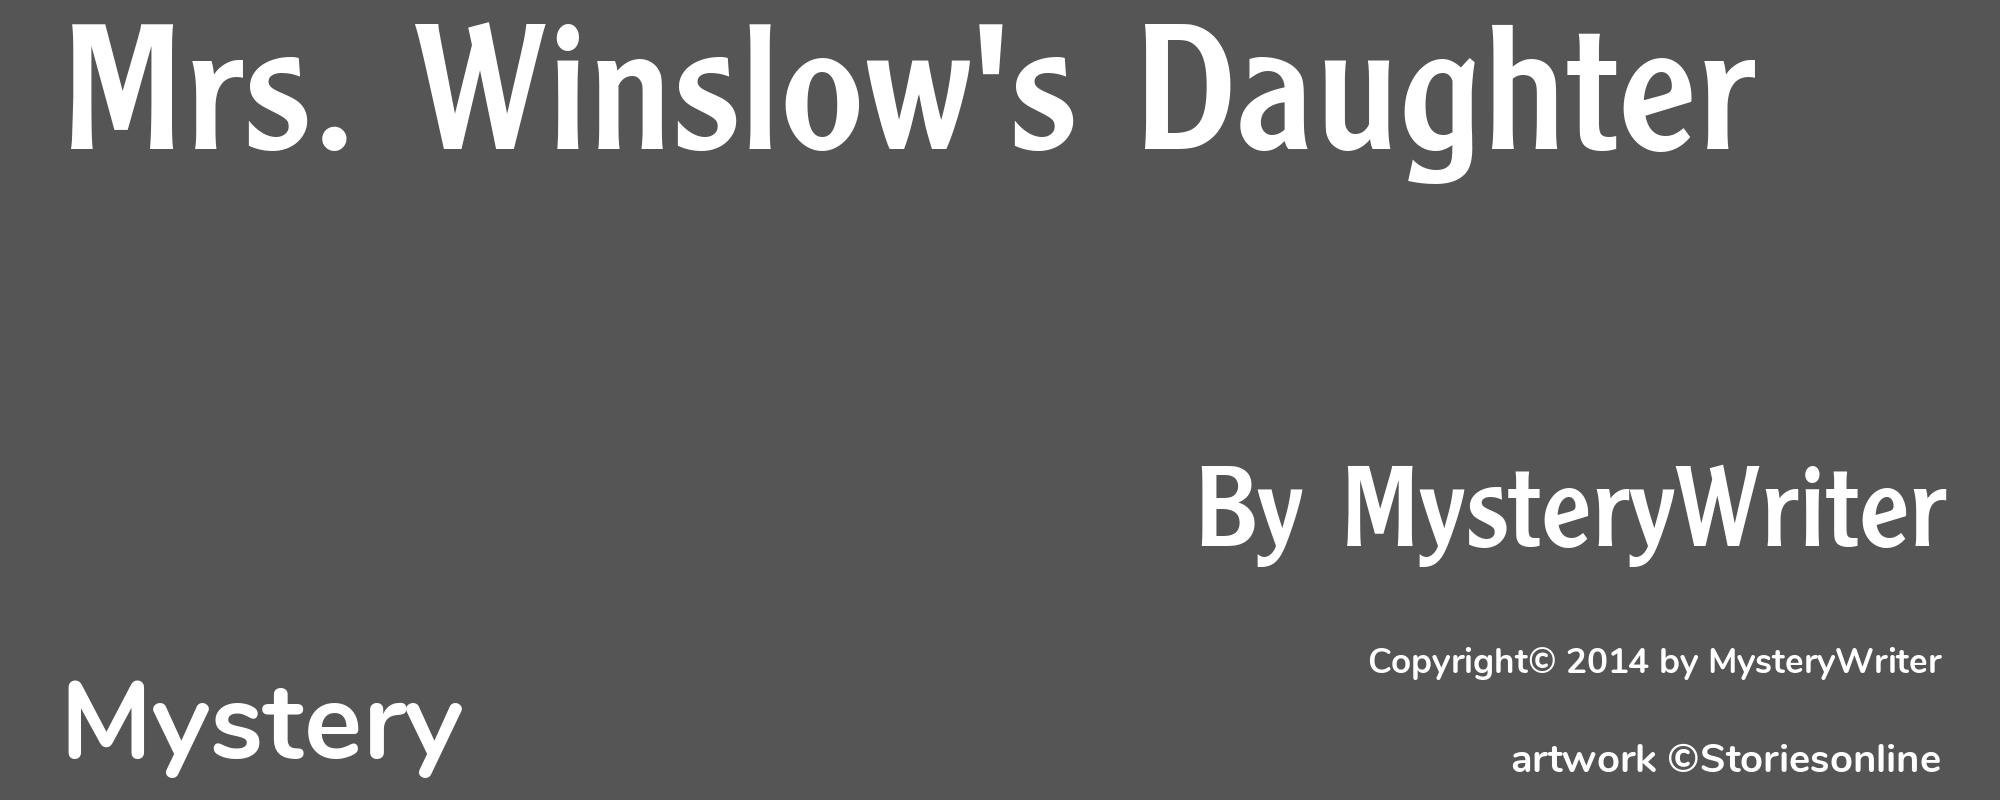 Mrs. Winslow's Daughter - Cover